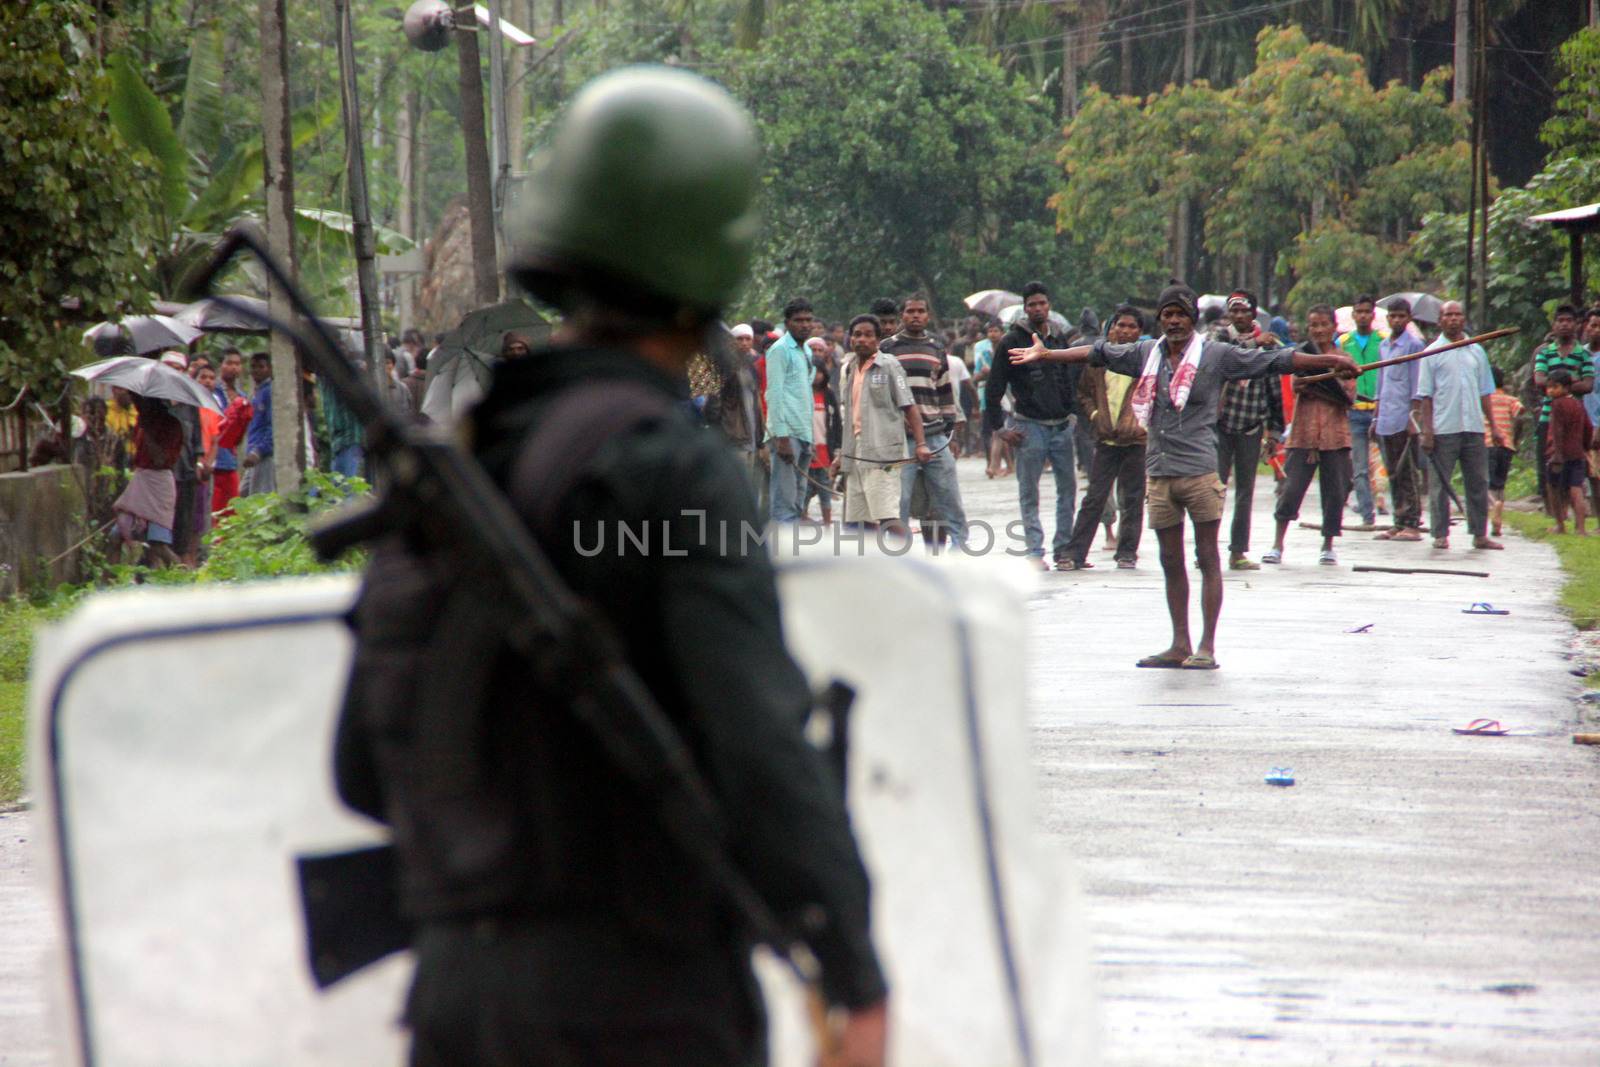 INDIA, Tinsukia: An officer stands guard after a protest where at least eleven people were killed, and twelve others injured, when a high-voltage electric cable was hit by stray police fire and fell on protesters in Tinsukia, Assam, India on April 11, 2016. Protesters had reportedly stormed a police station, calling on police to hand over a group of suspects arrested for killing two people last week. Police opened fire to disperse protesters, and a stray bullet severed the power line, which fell and electrocuted demonstrators.